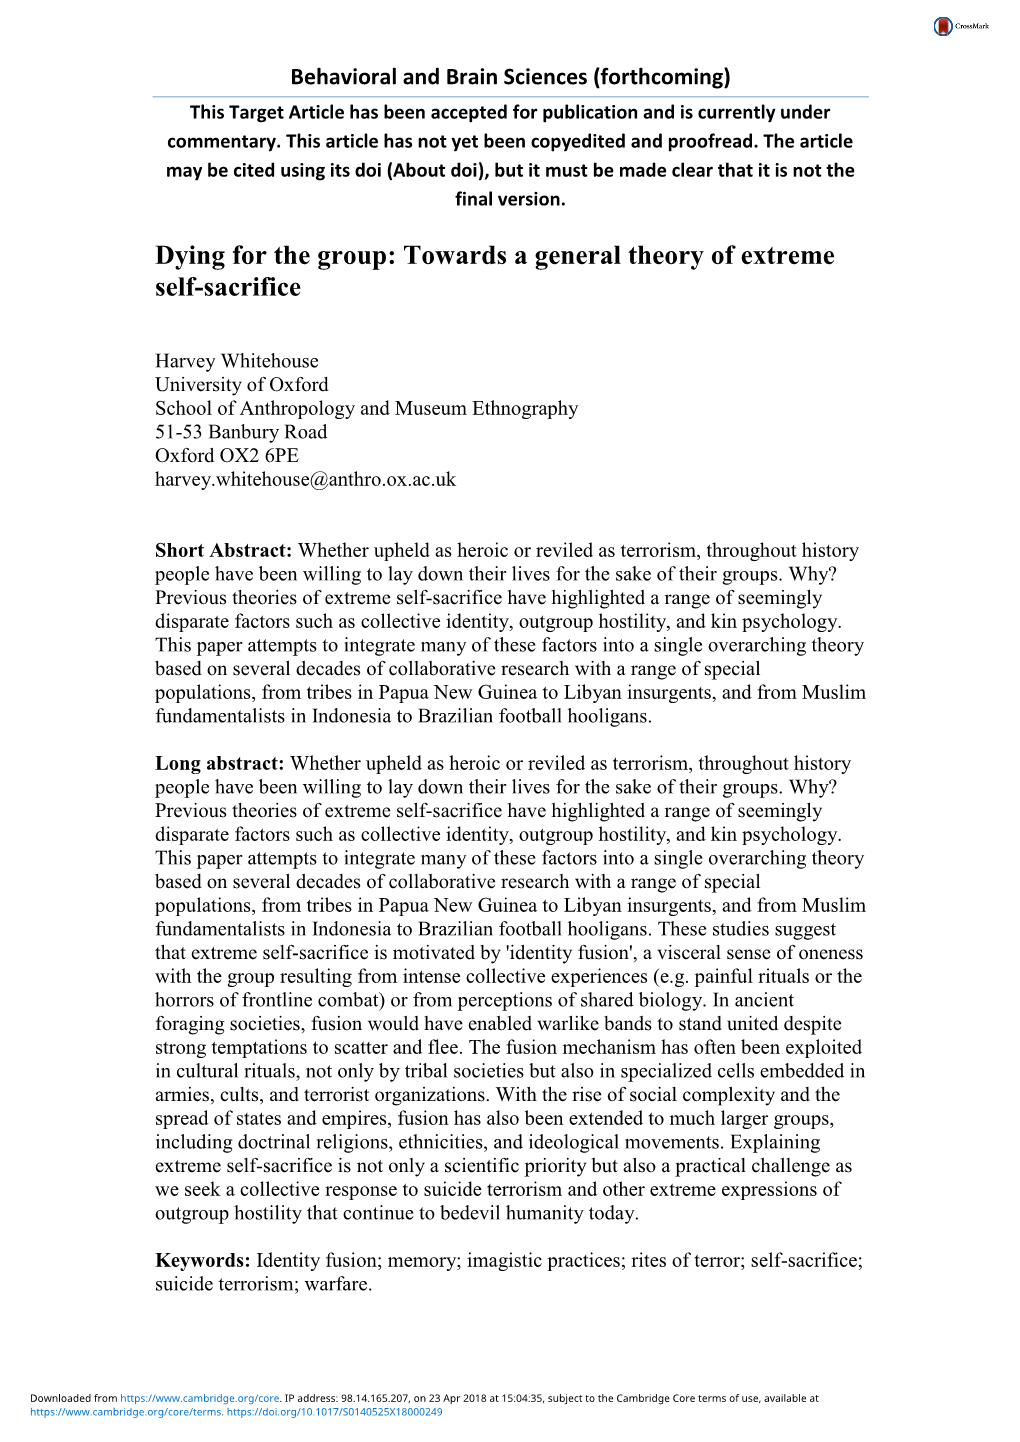 Dying for the Group: Towards a General Theory of Extreme Self-Sacrifice